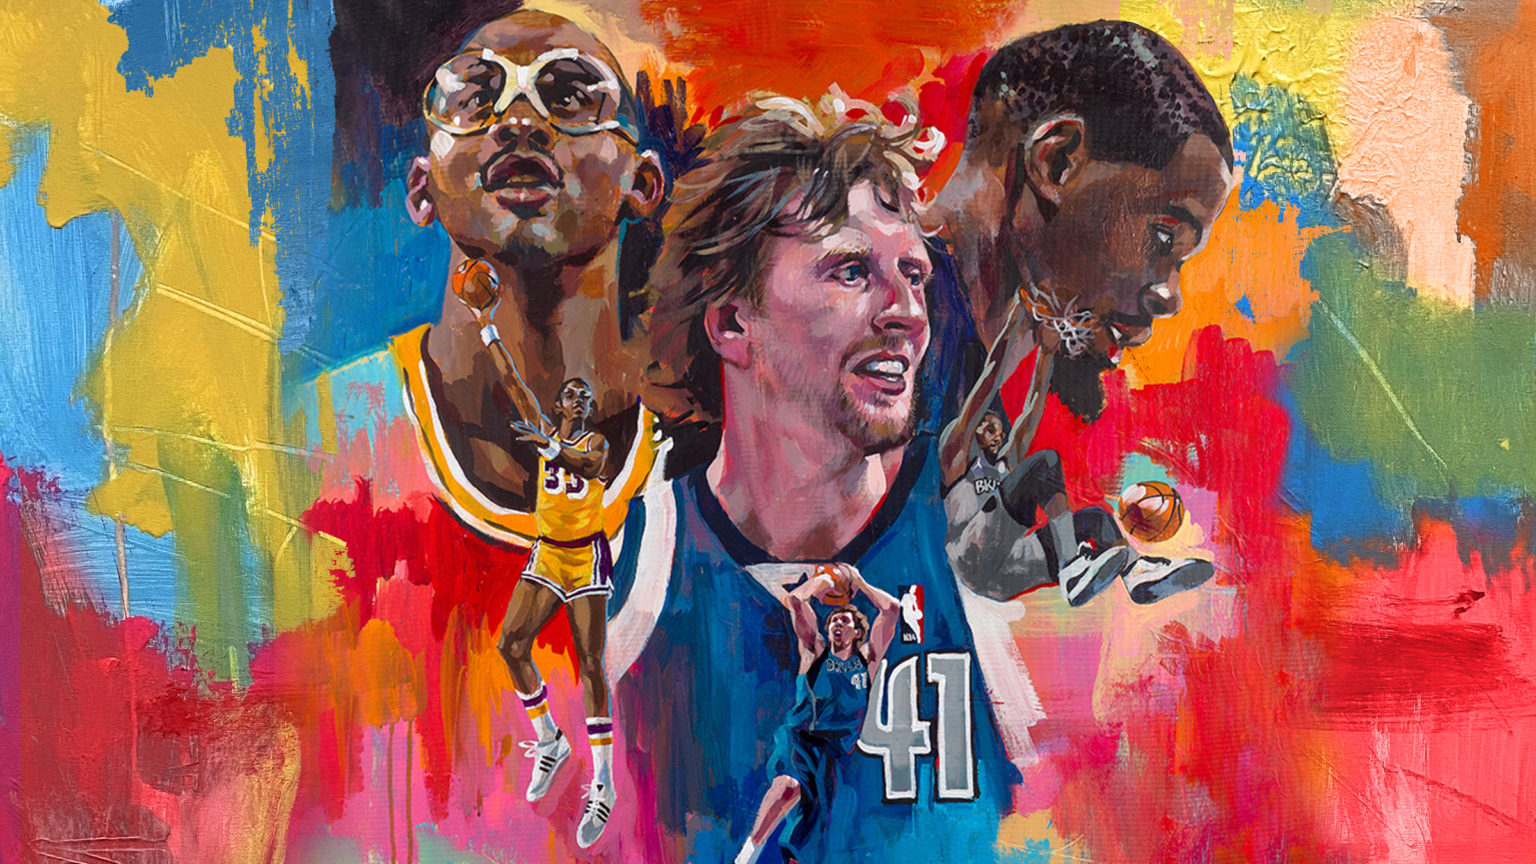 Exclusive: Inside KD, Dirk, & Kareem's NBA 2K22 Special Edition Cover